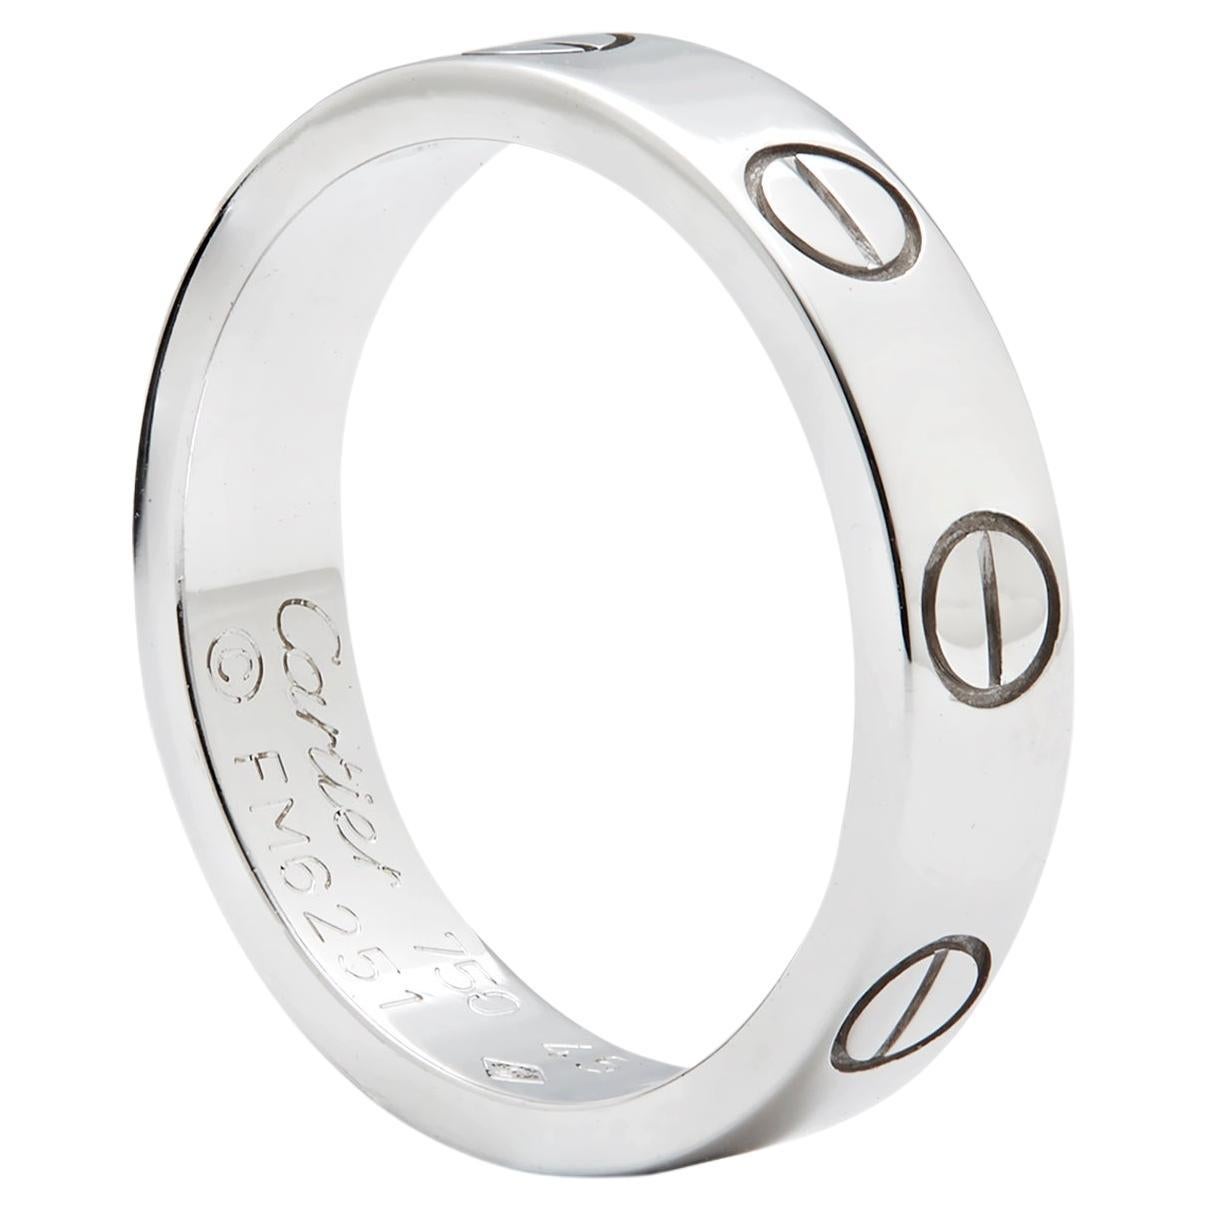 Cartier Love ring white gold 3.6mm model number B4085152